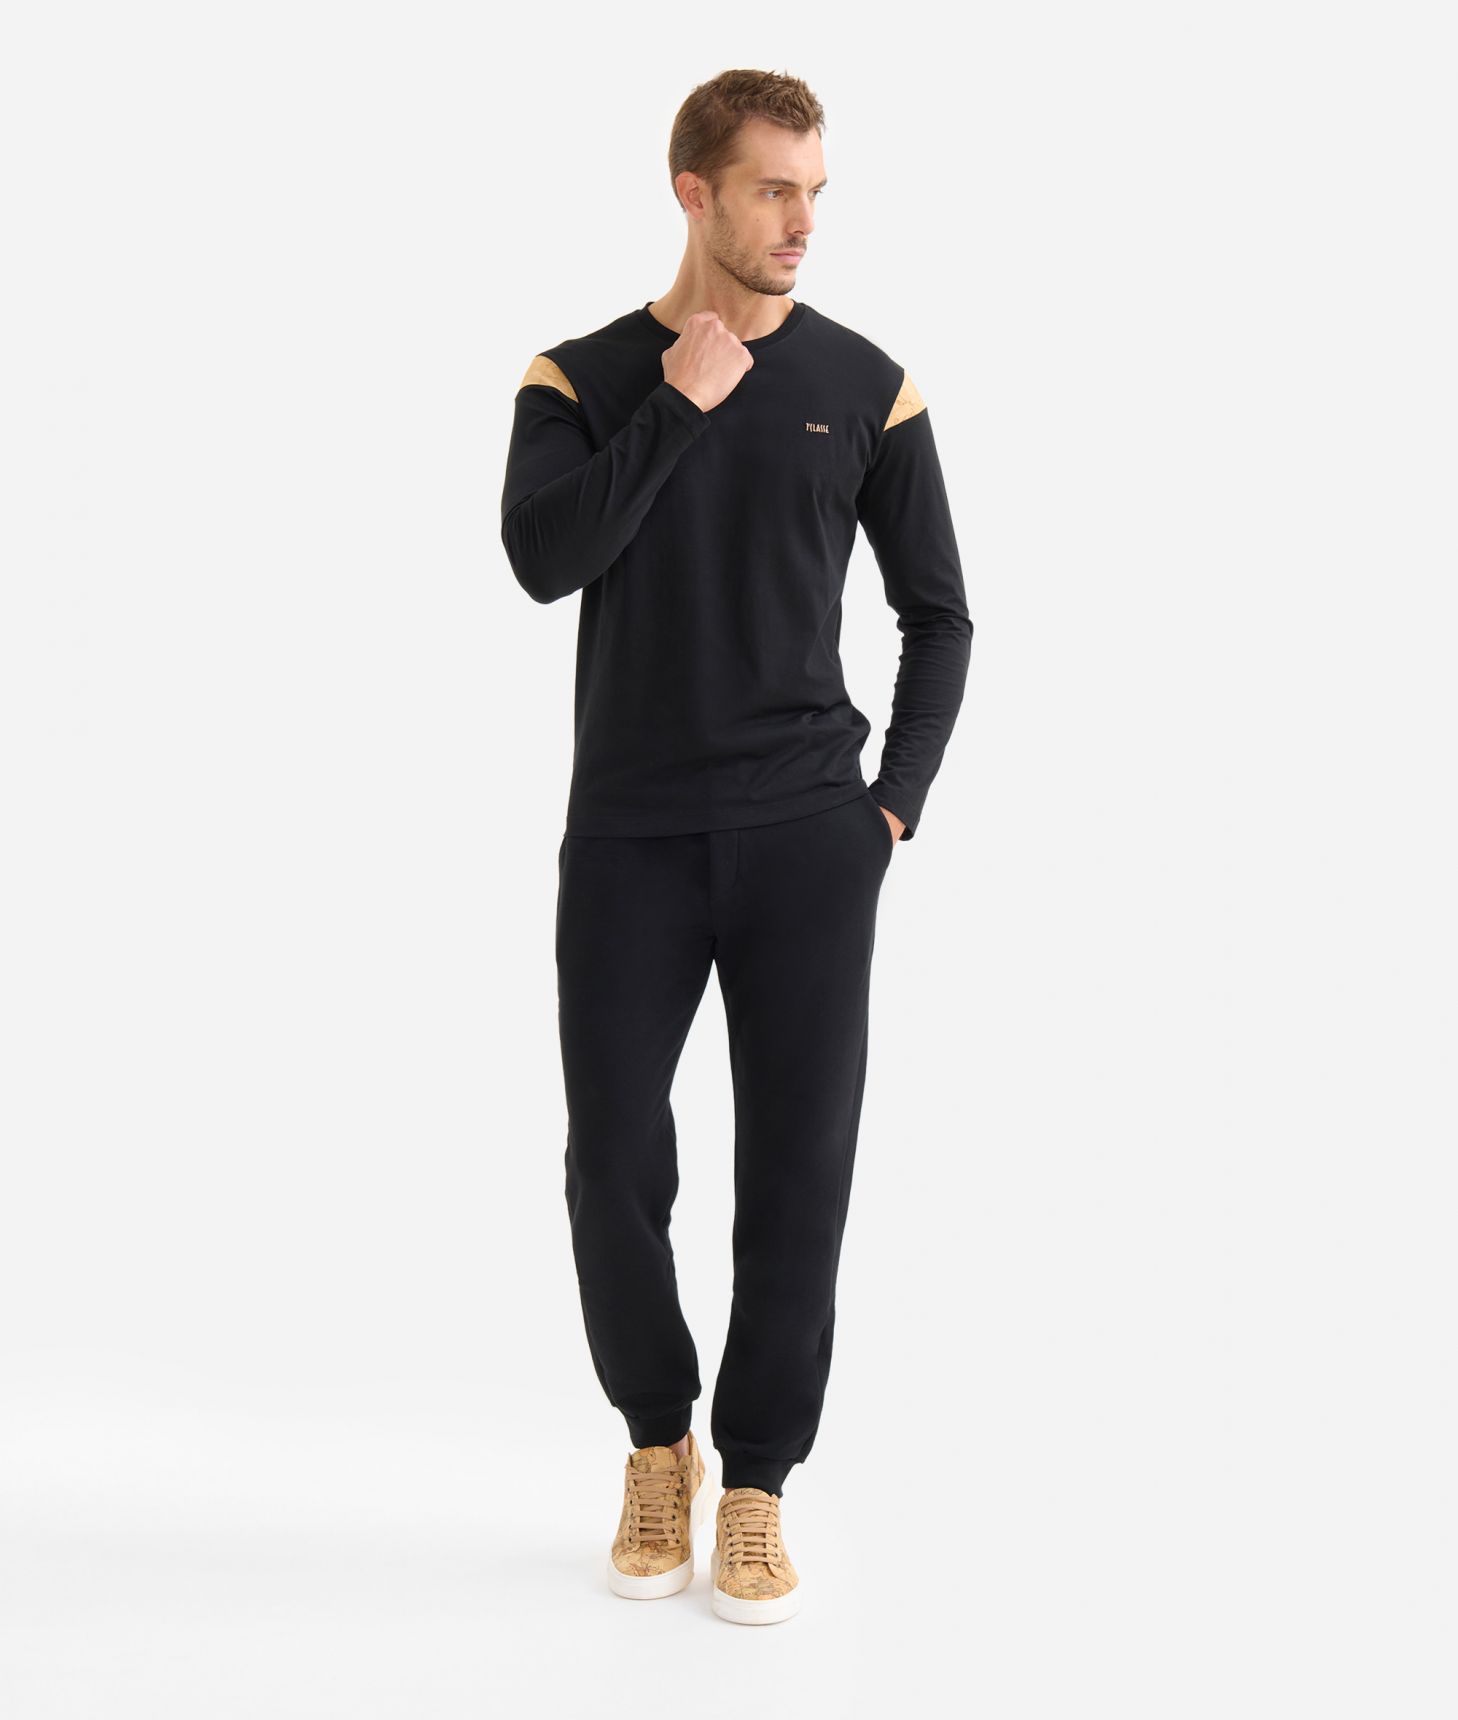 Long-sleeved cotton t-shirt Black,front